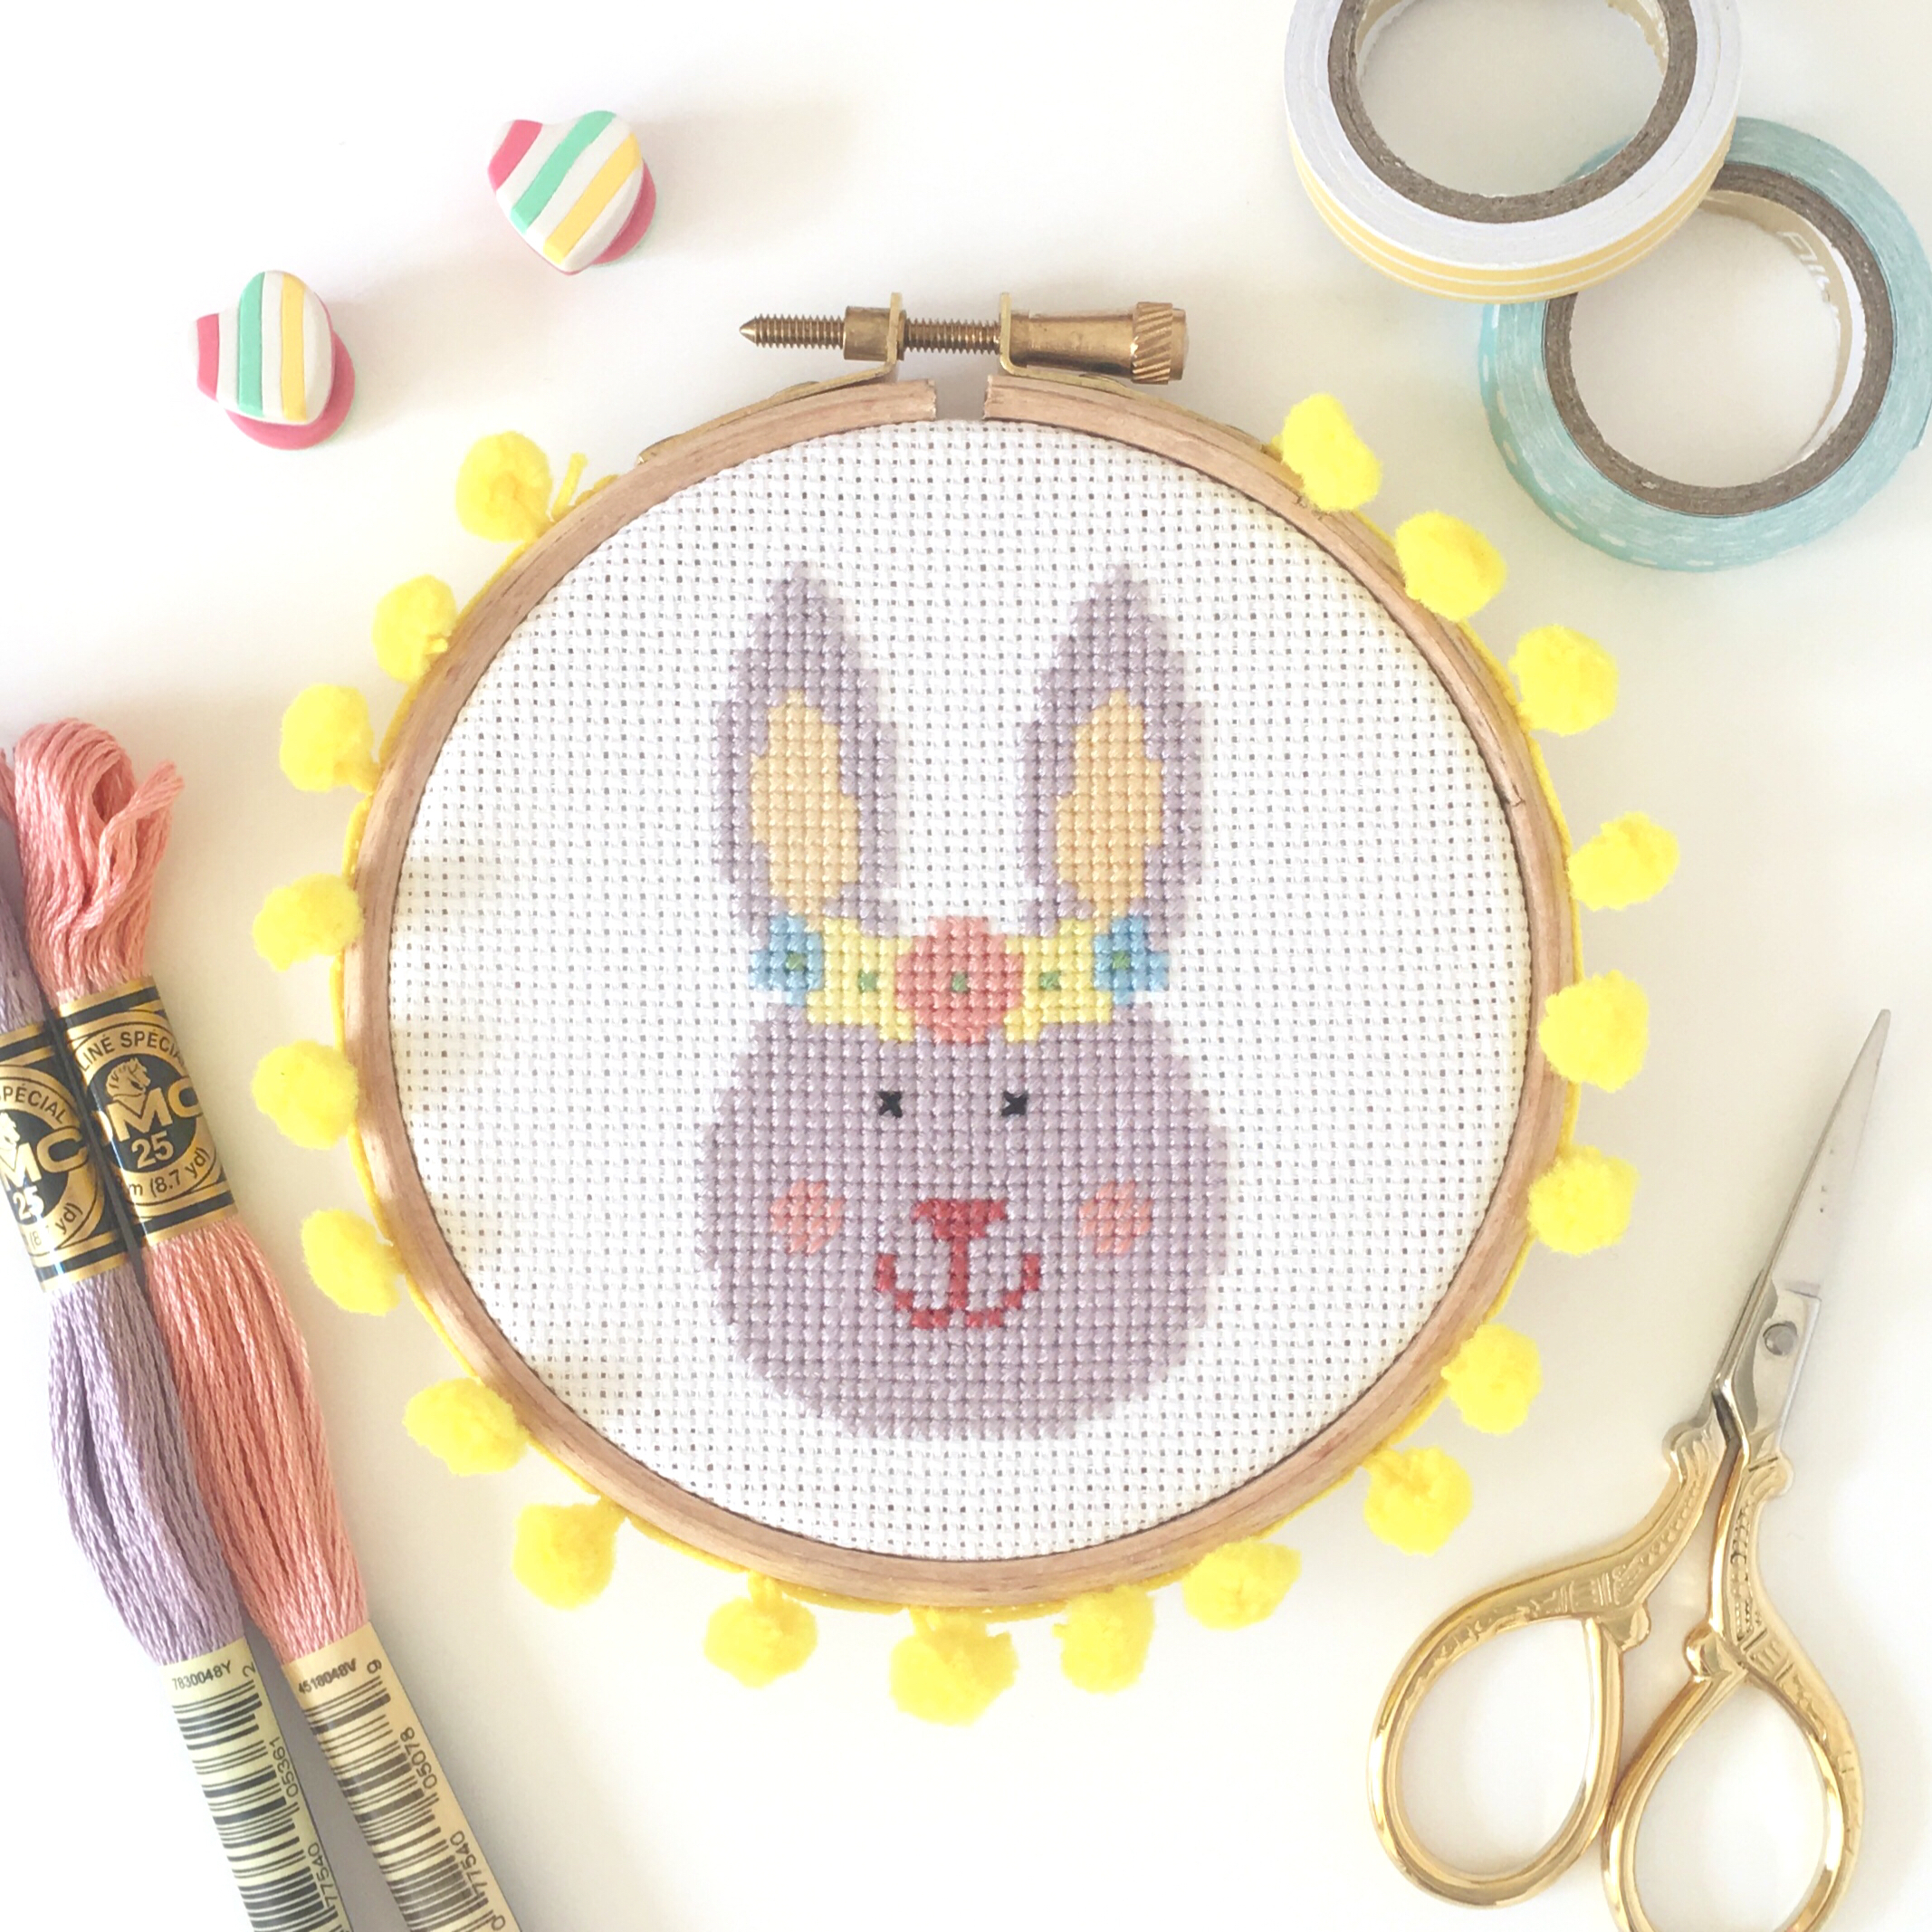 ,Handmade 14CT Printed Embroidery Kit Needlework Craft cici store DIY Counted Cross Stitch Kits for Beginners-Teacup Rabbit 2626CM